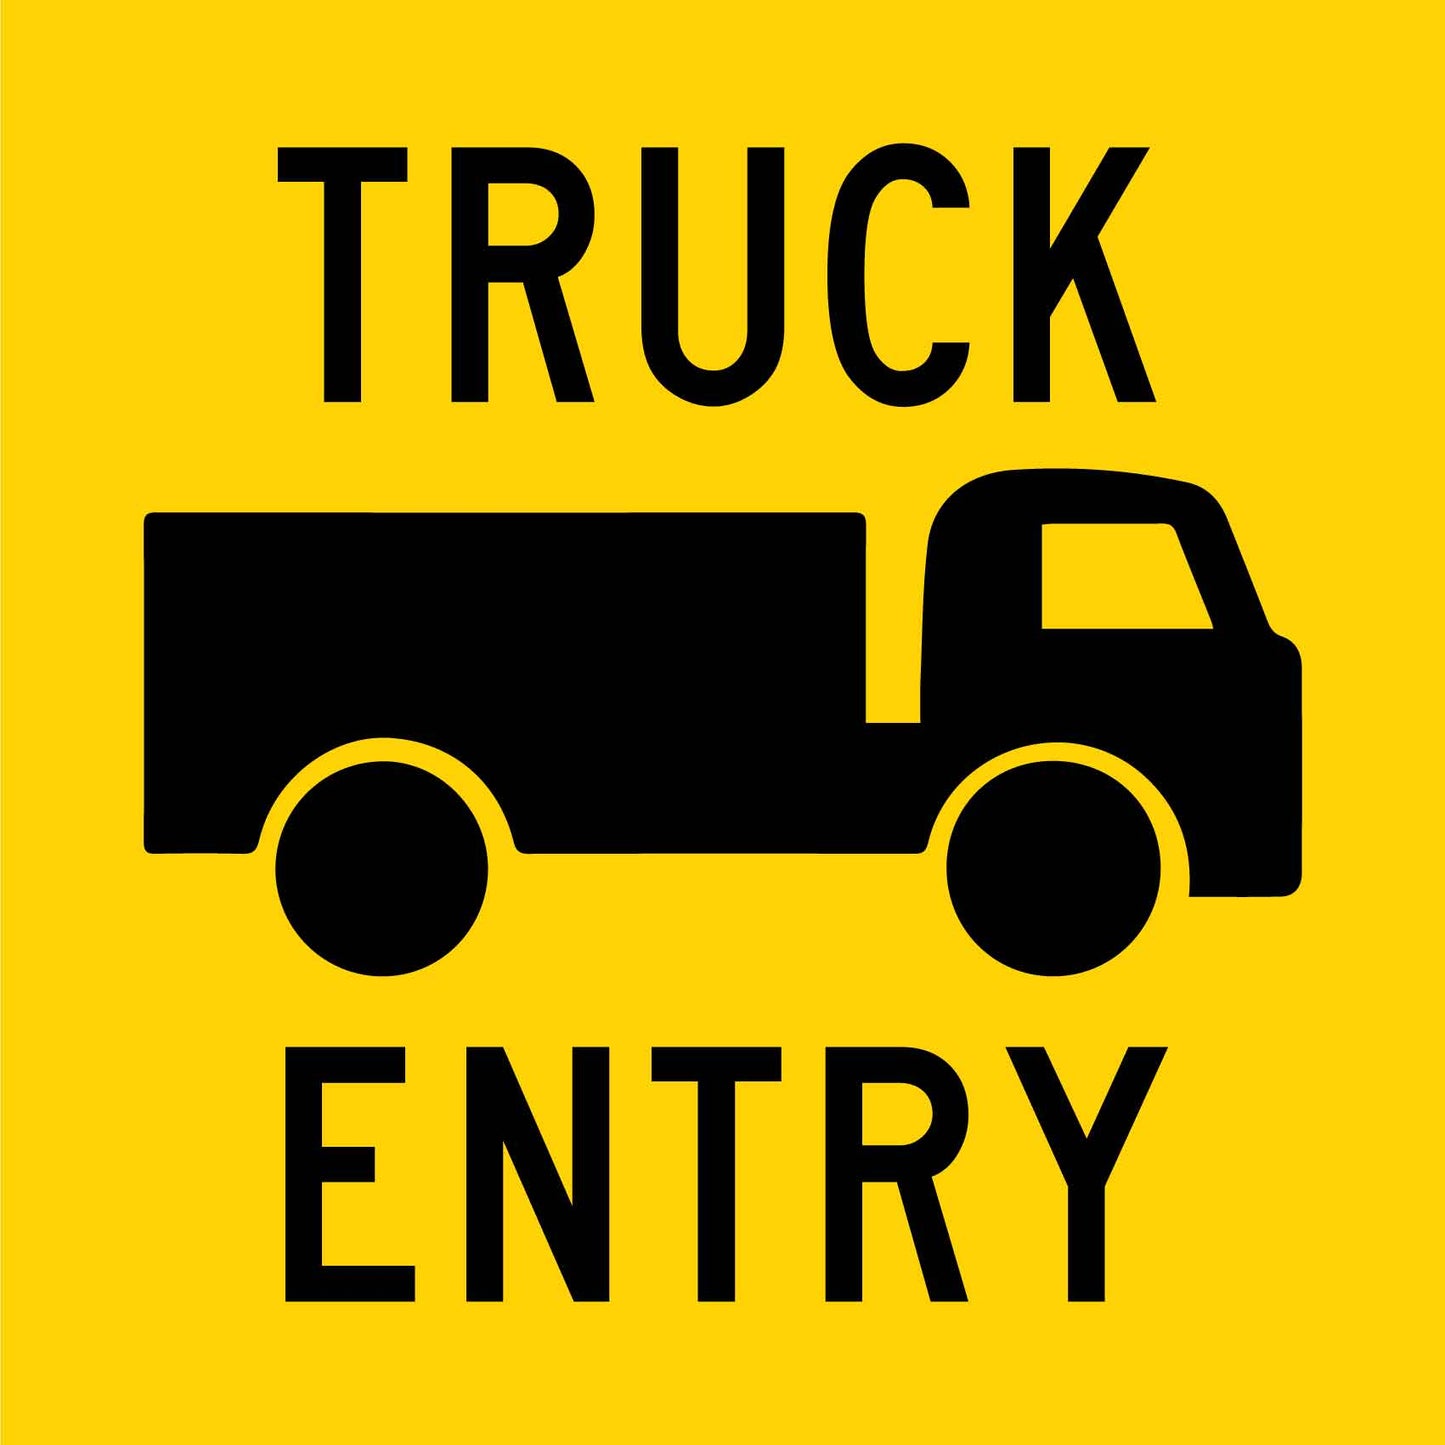 Truck Entry Multi Message Traffic Sign